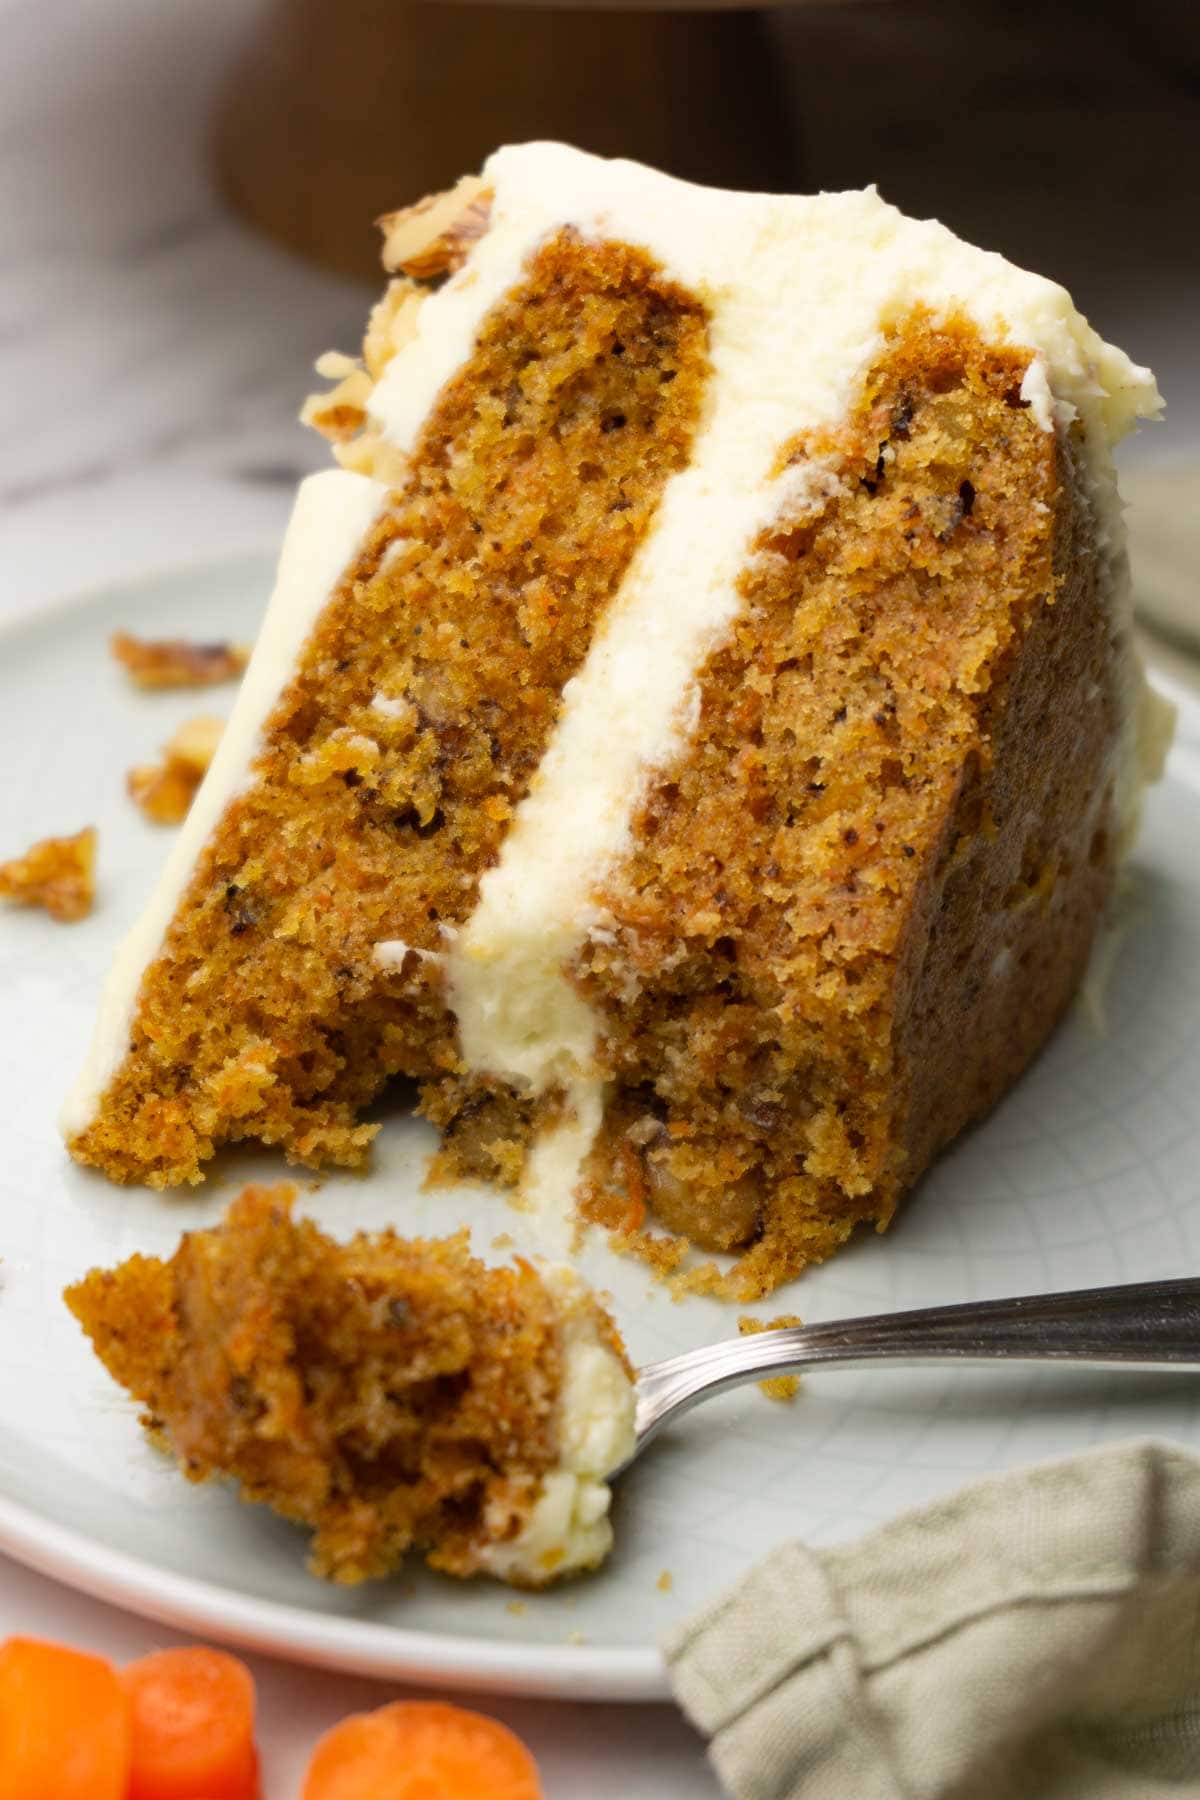 A piece of carrot cake with cream cheese frosting is decorated with chopped walnuts and served on a small round plate; one bite was taken.